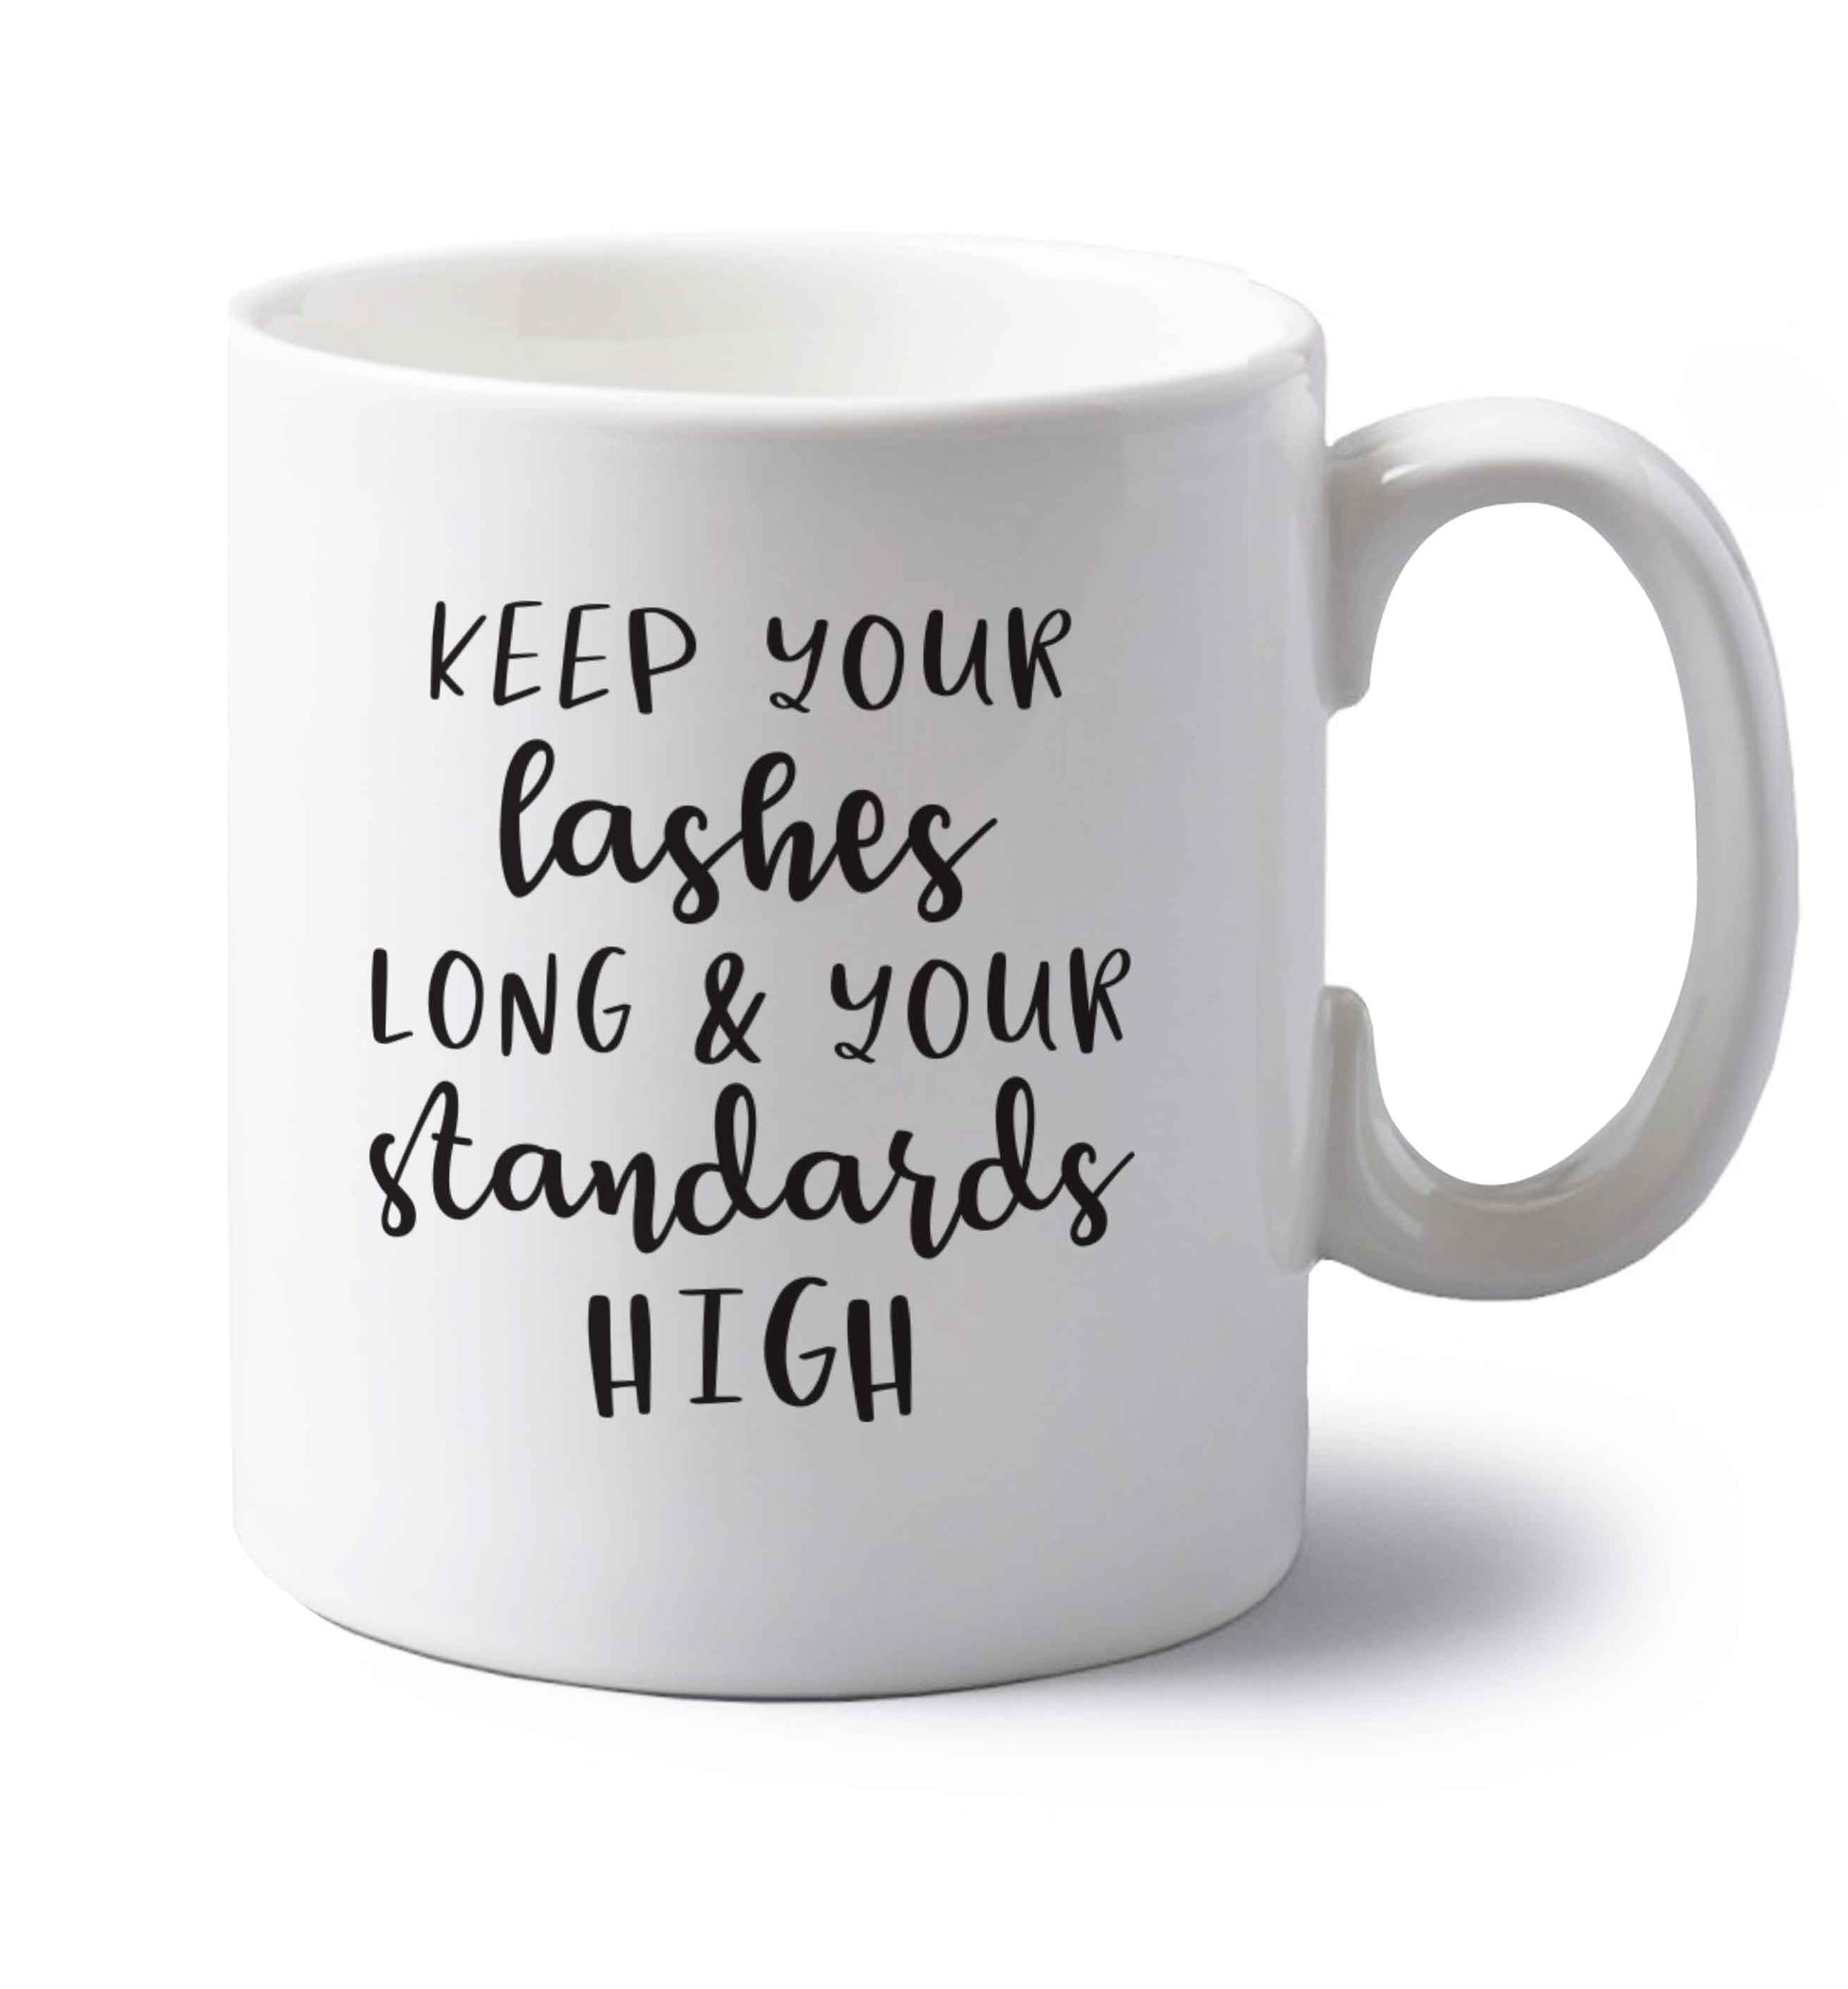 Keep your lashes long and your standards high left handed white ceramic mug 